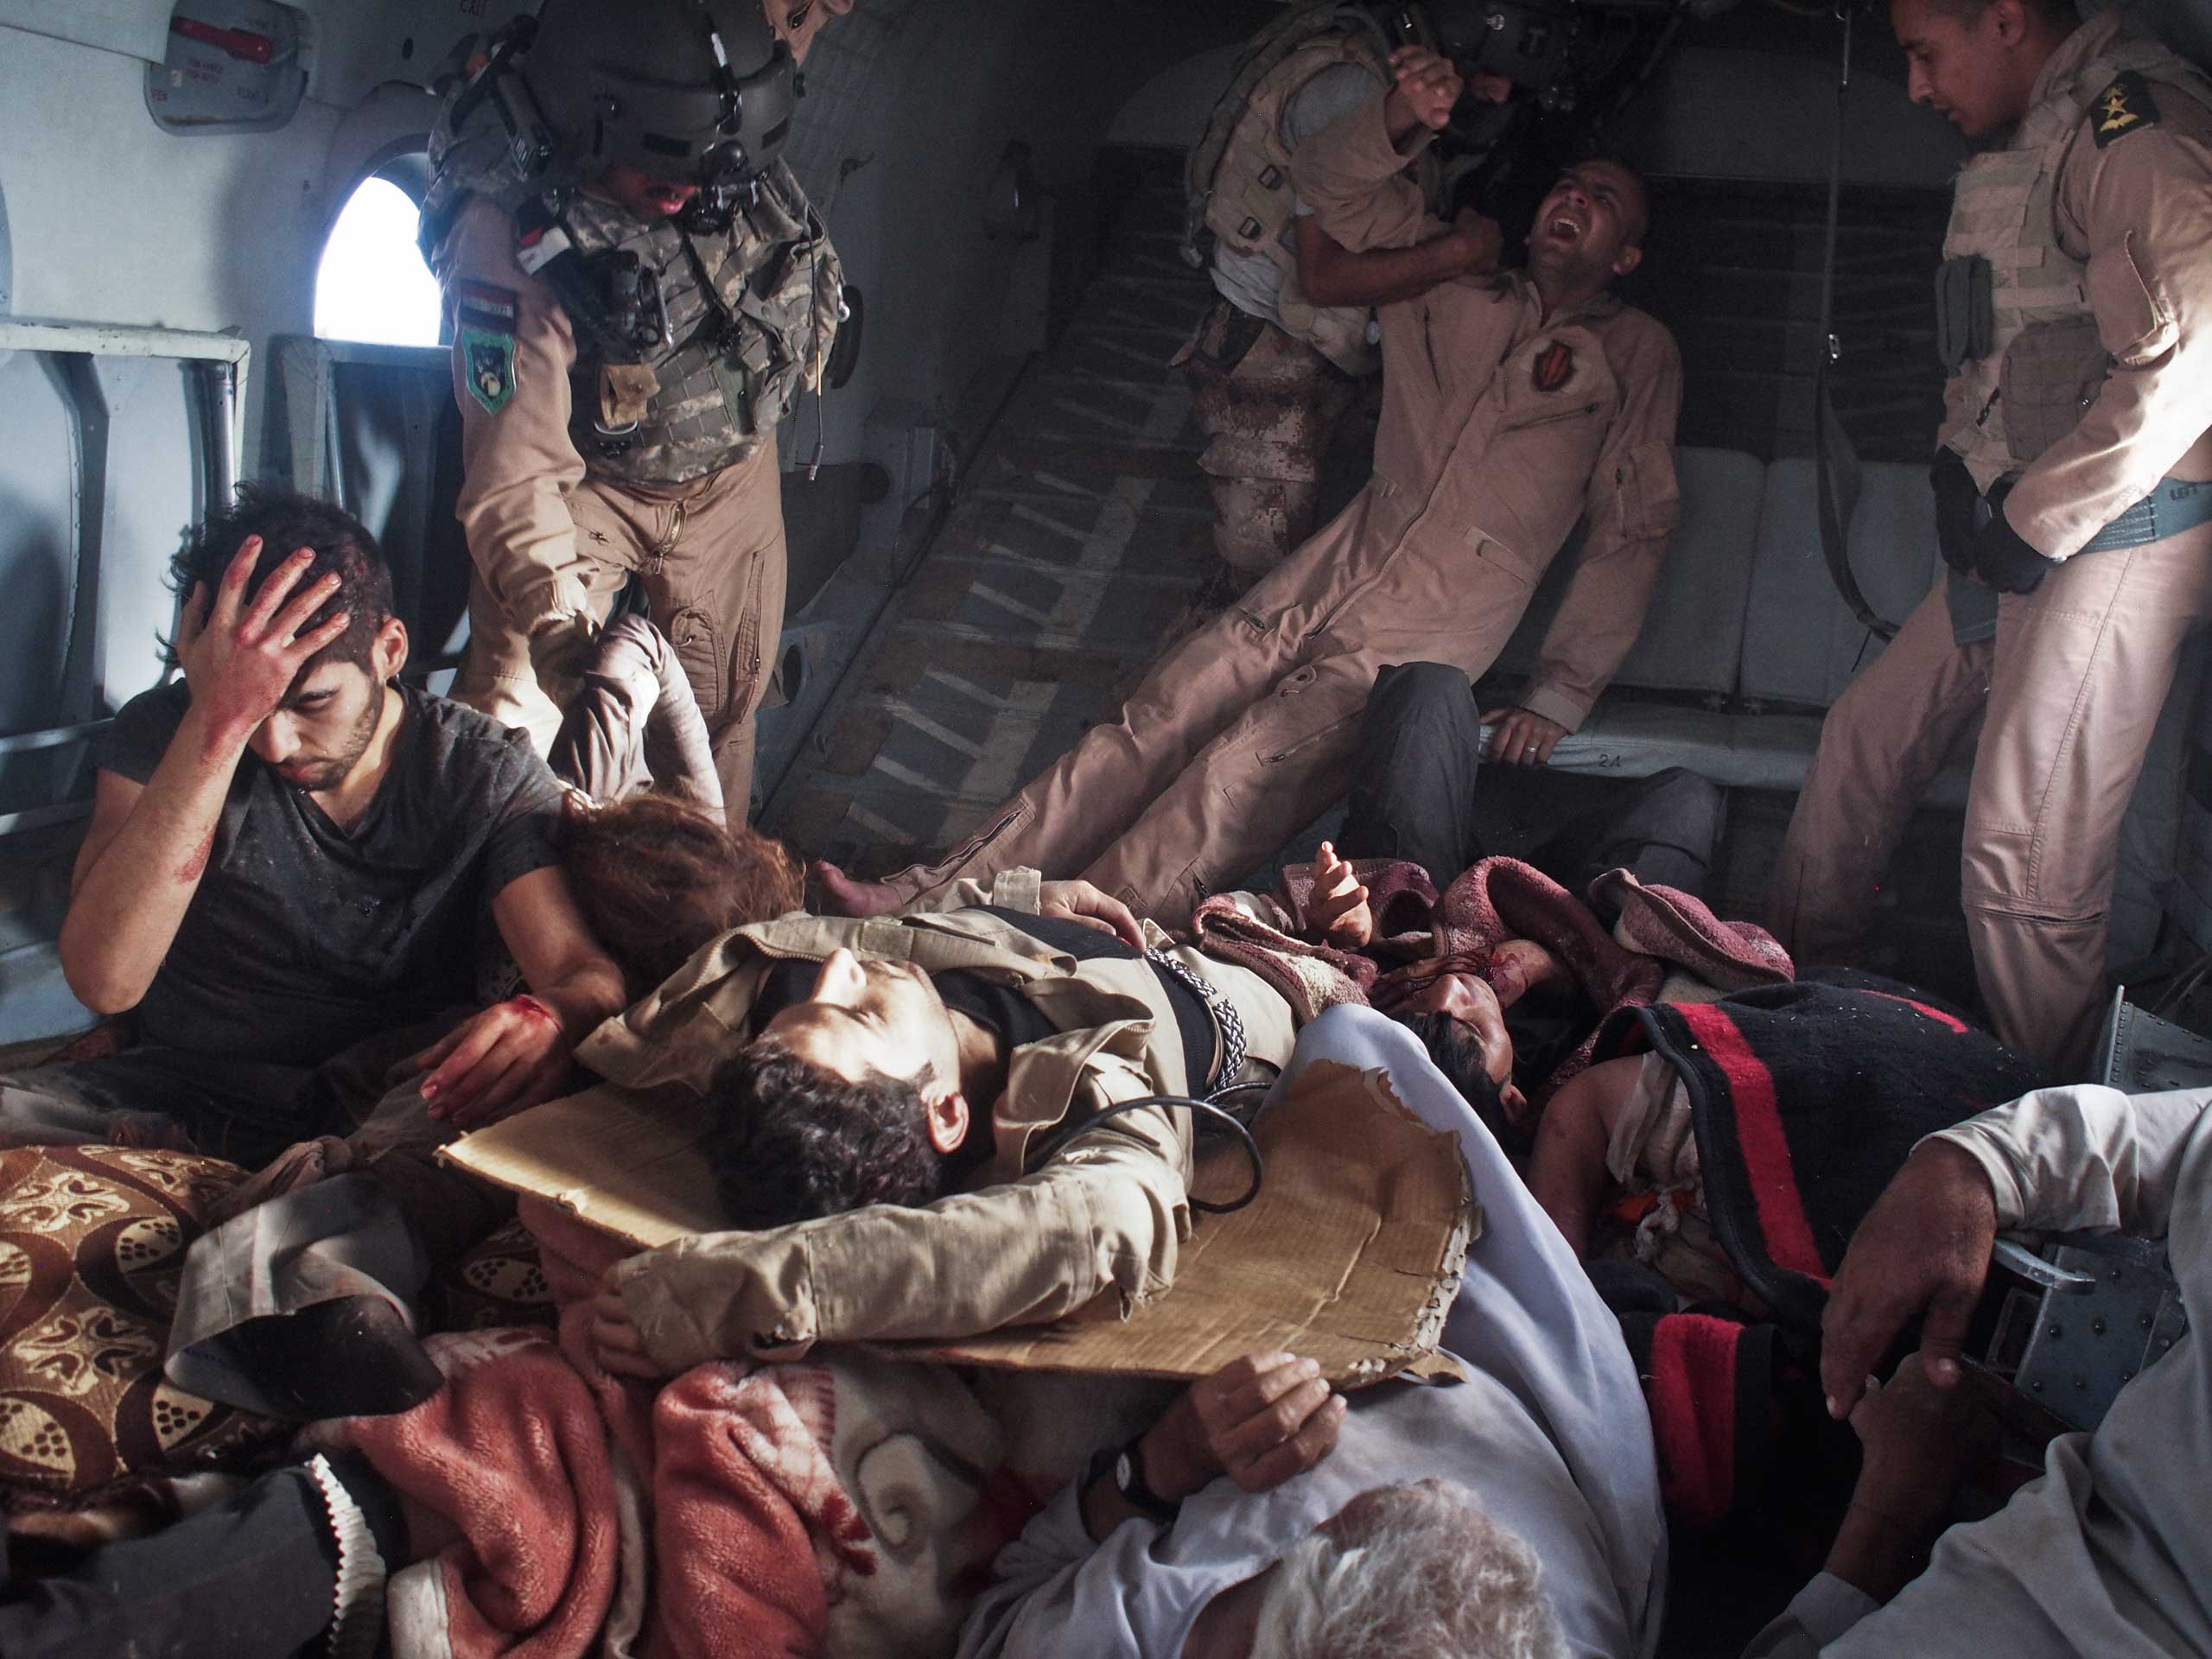 Survivors of the crash, including Yazidi refugees and Kurdish and Iraqi Army personnel, onboard a rescue helicopter that transported them from the crash site back to Kurdish-controlled Dohuk Province. Sinjar Mountains, Iraq, Aug. 12, 2014.